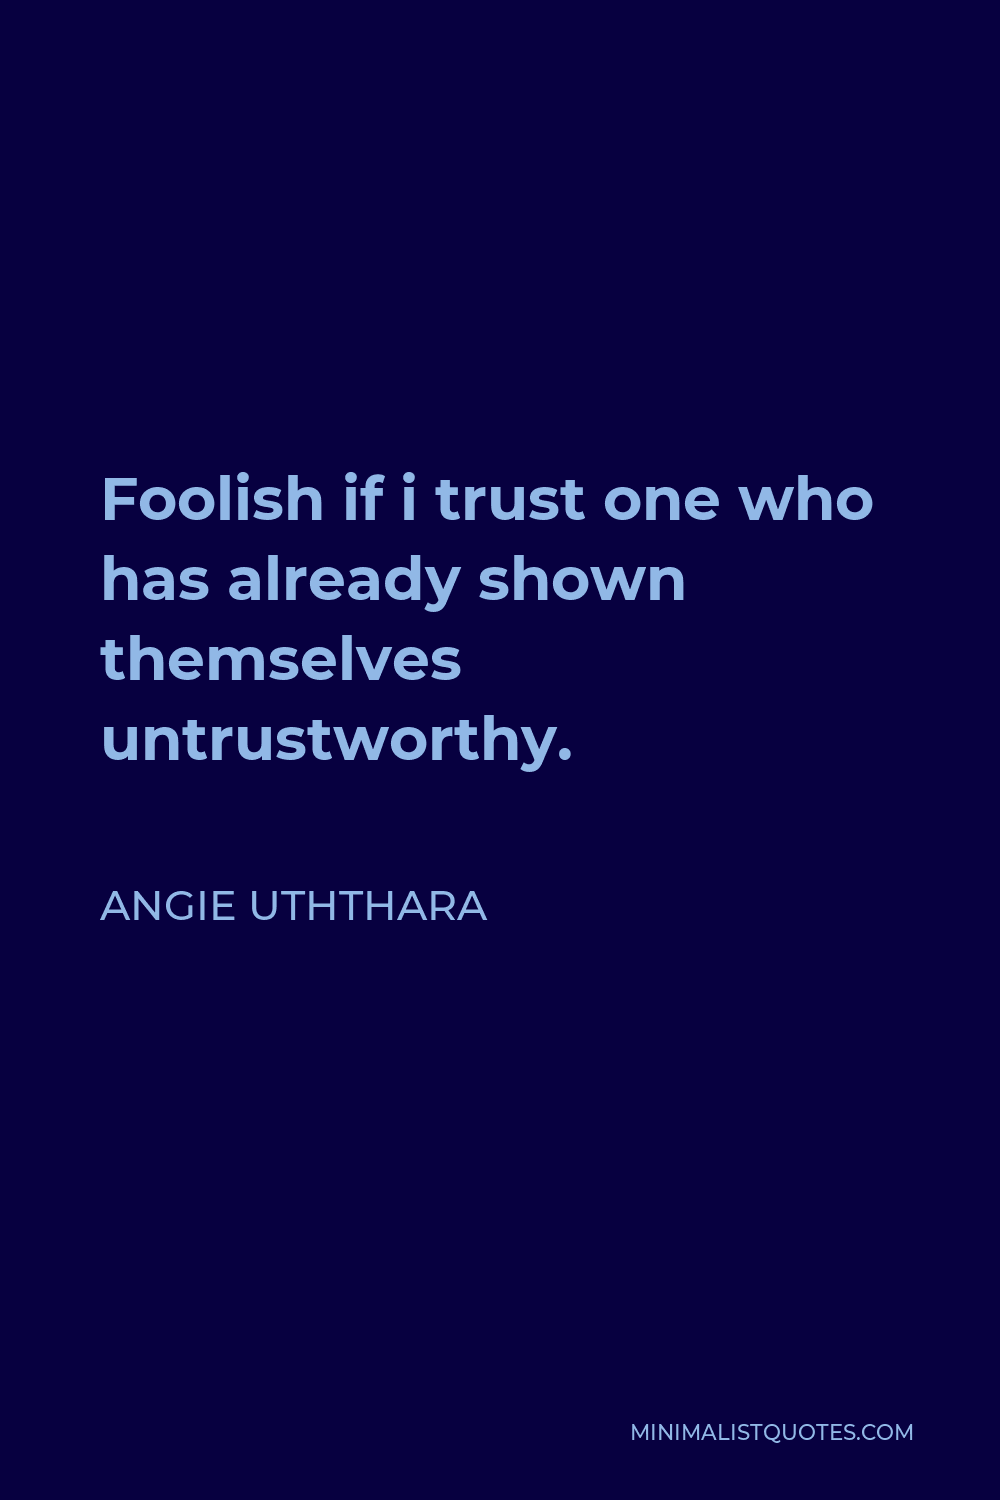 Angie Uththara Quote - Foolish if i trust one who has already shown themselves untrustworthy.